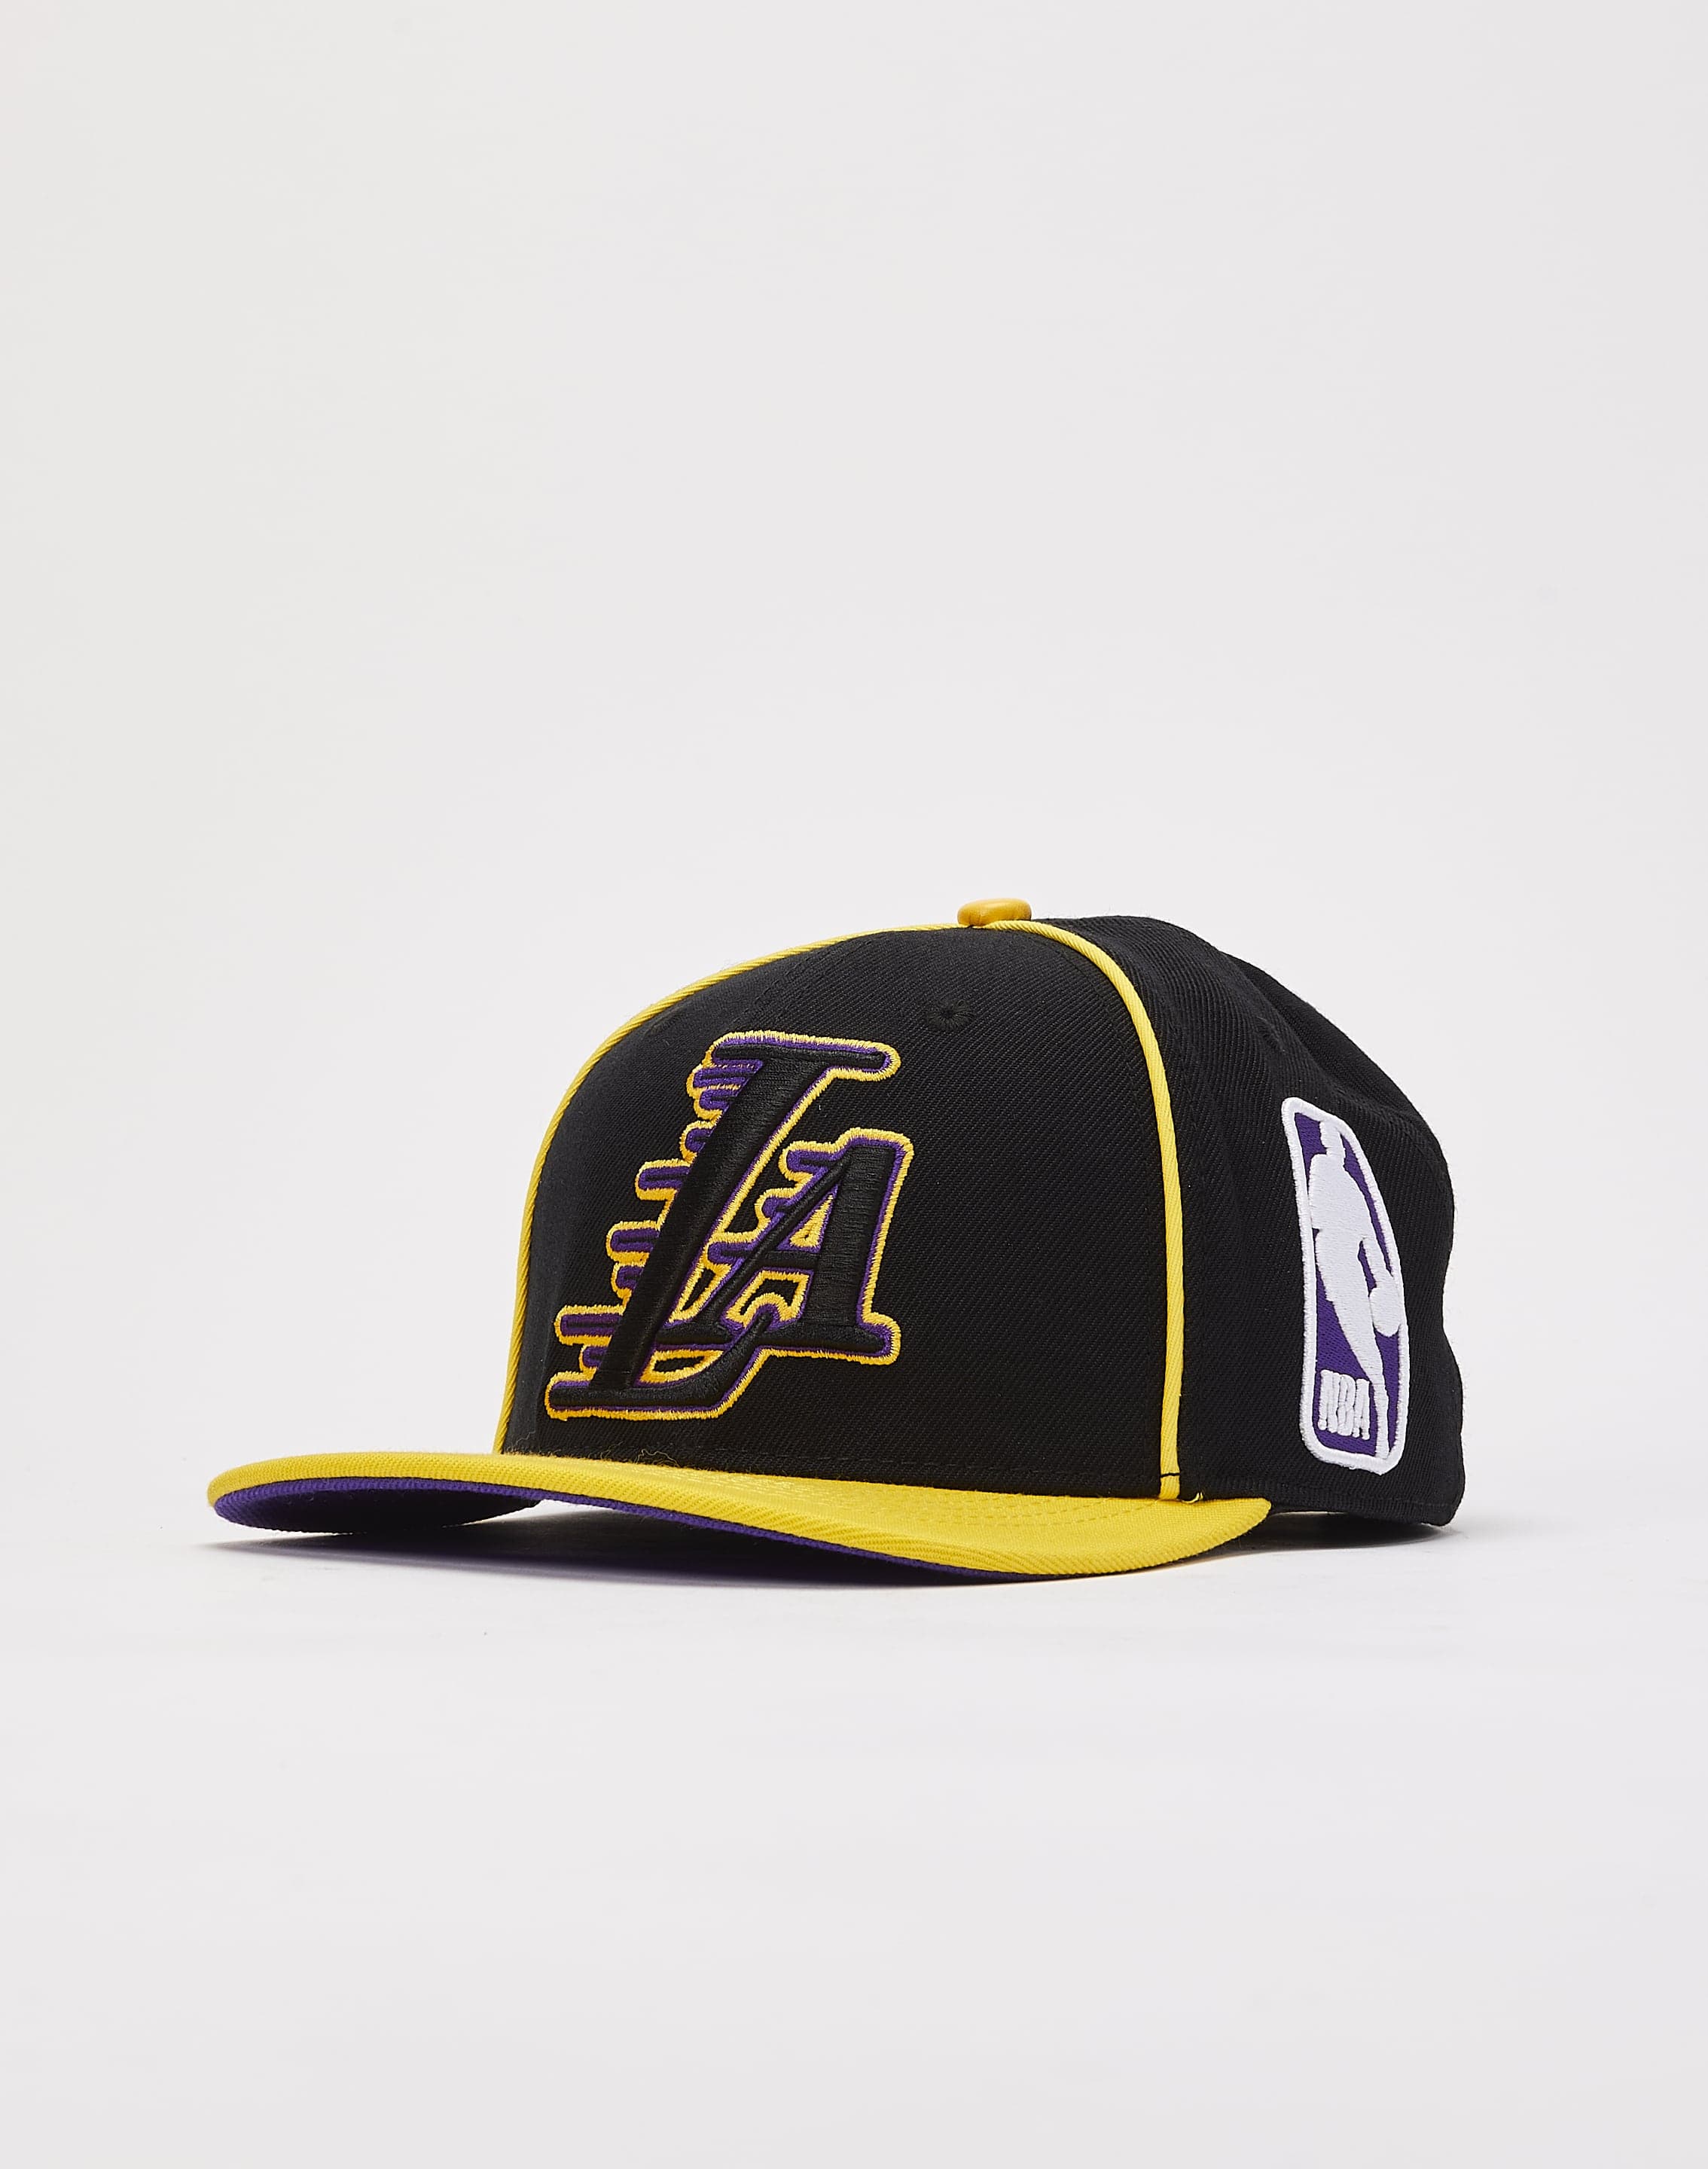 Men's Mitchell & Ness Black Los Angeles Lakers Showtime 17X